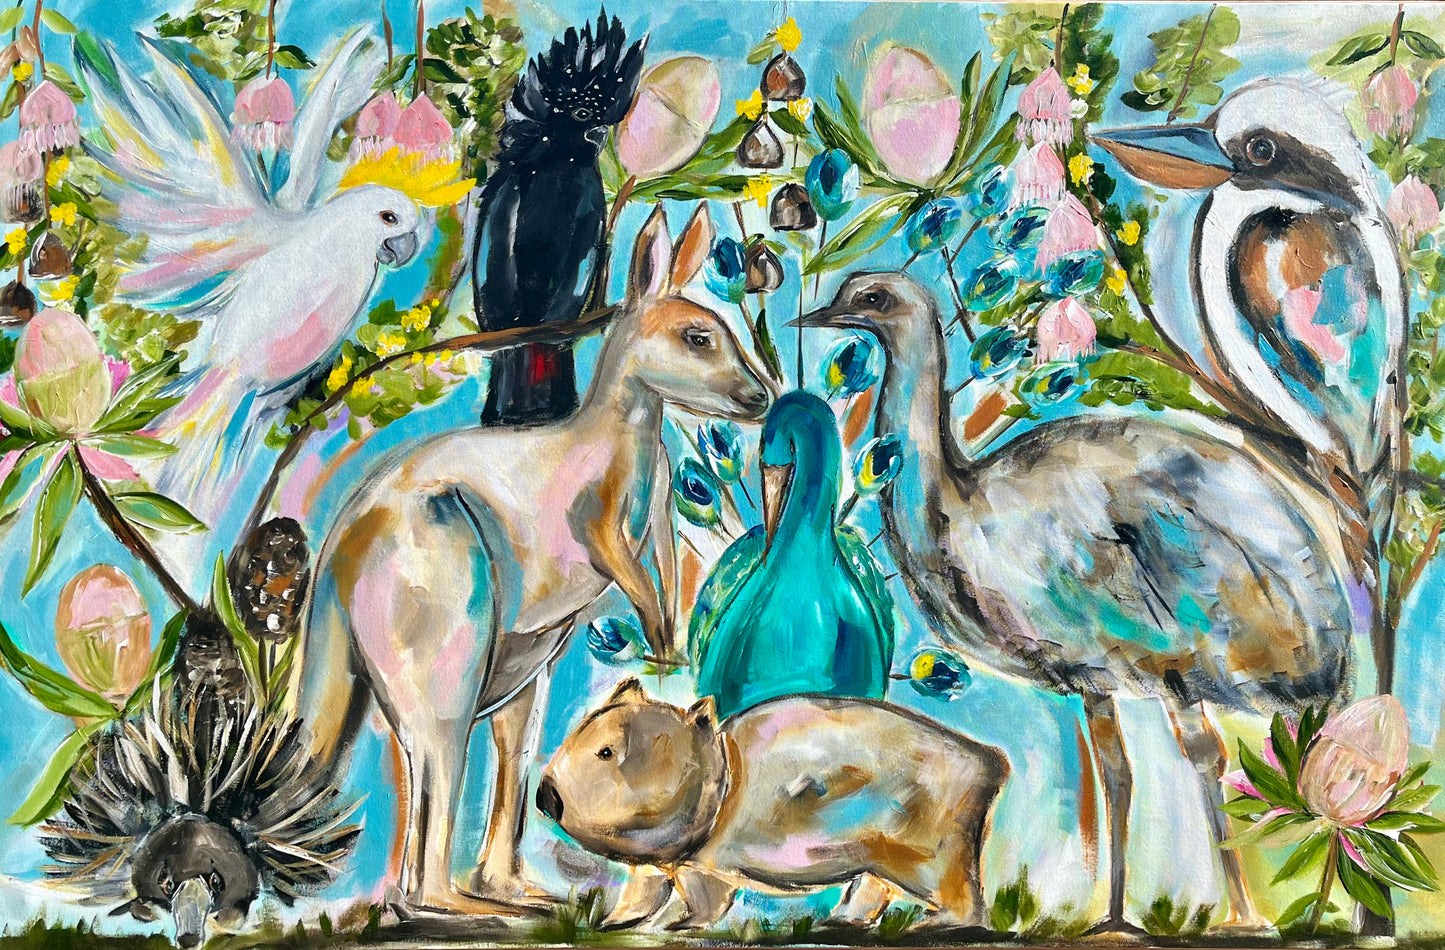 Aussie Animals big and small - 1.5x1m - Original Artwork - Available by Commission